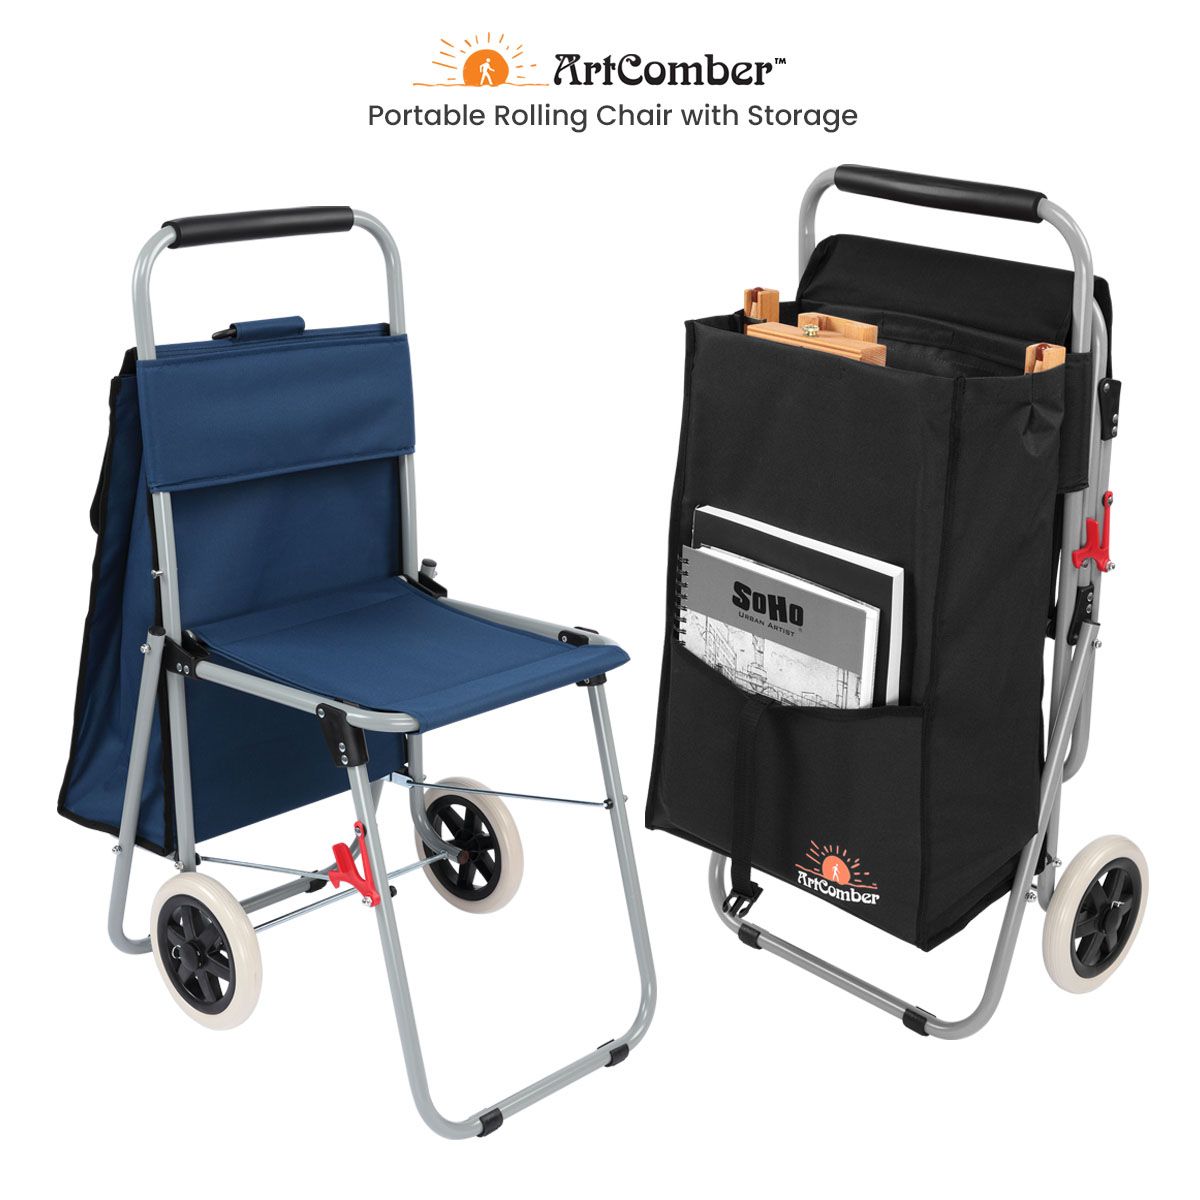 ArtComber Portable Rolling Chair